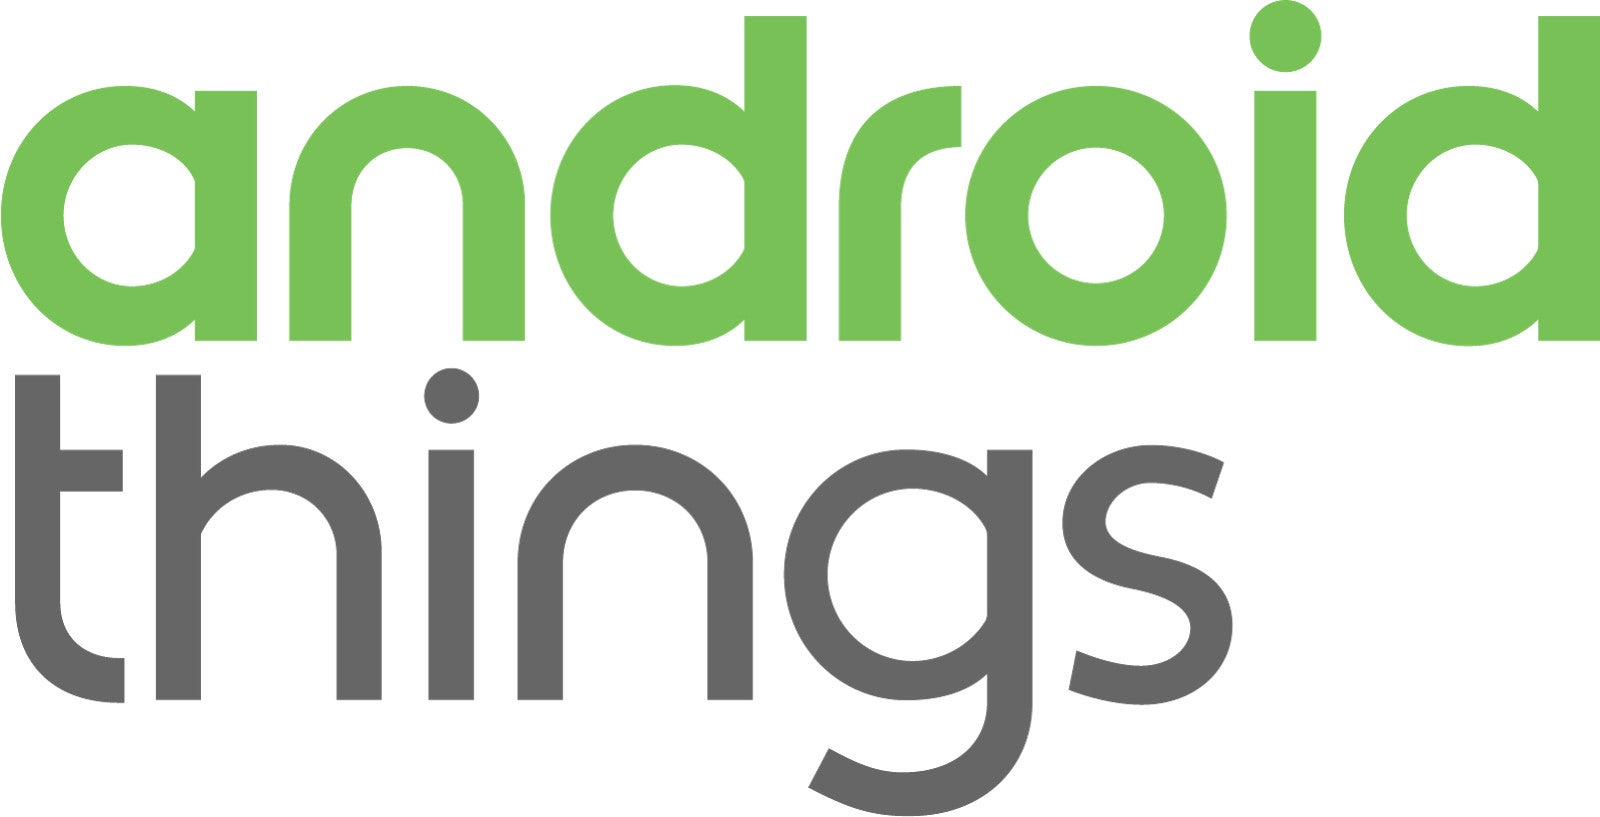 Google releases Android Things Developer Preview 5 based on Android O